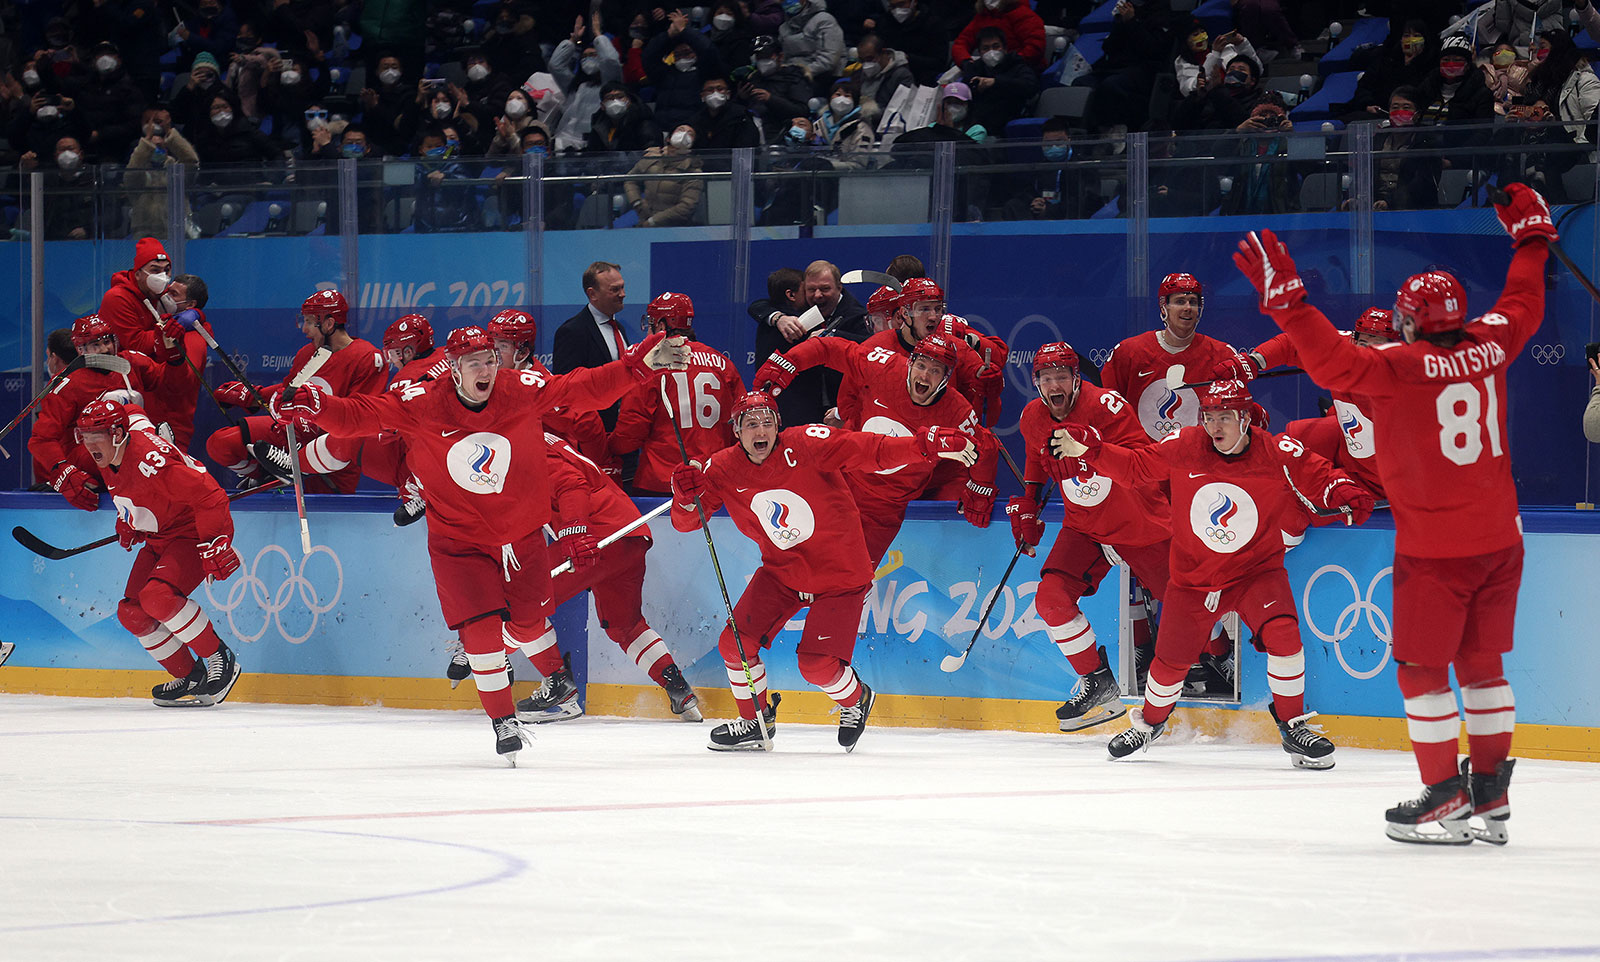 The Russian Olympic Committee hockey team celebrates after defeating Sweden in a penalty shootout on February 18.